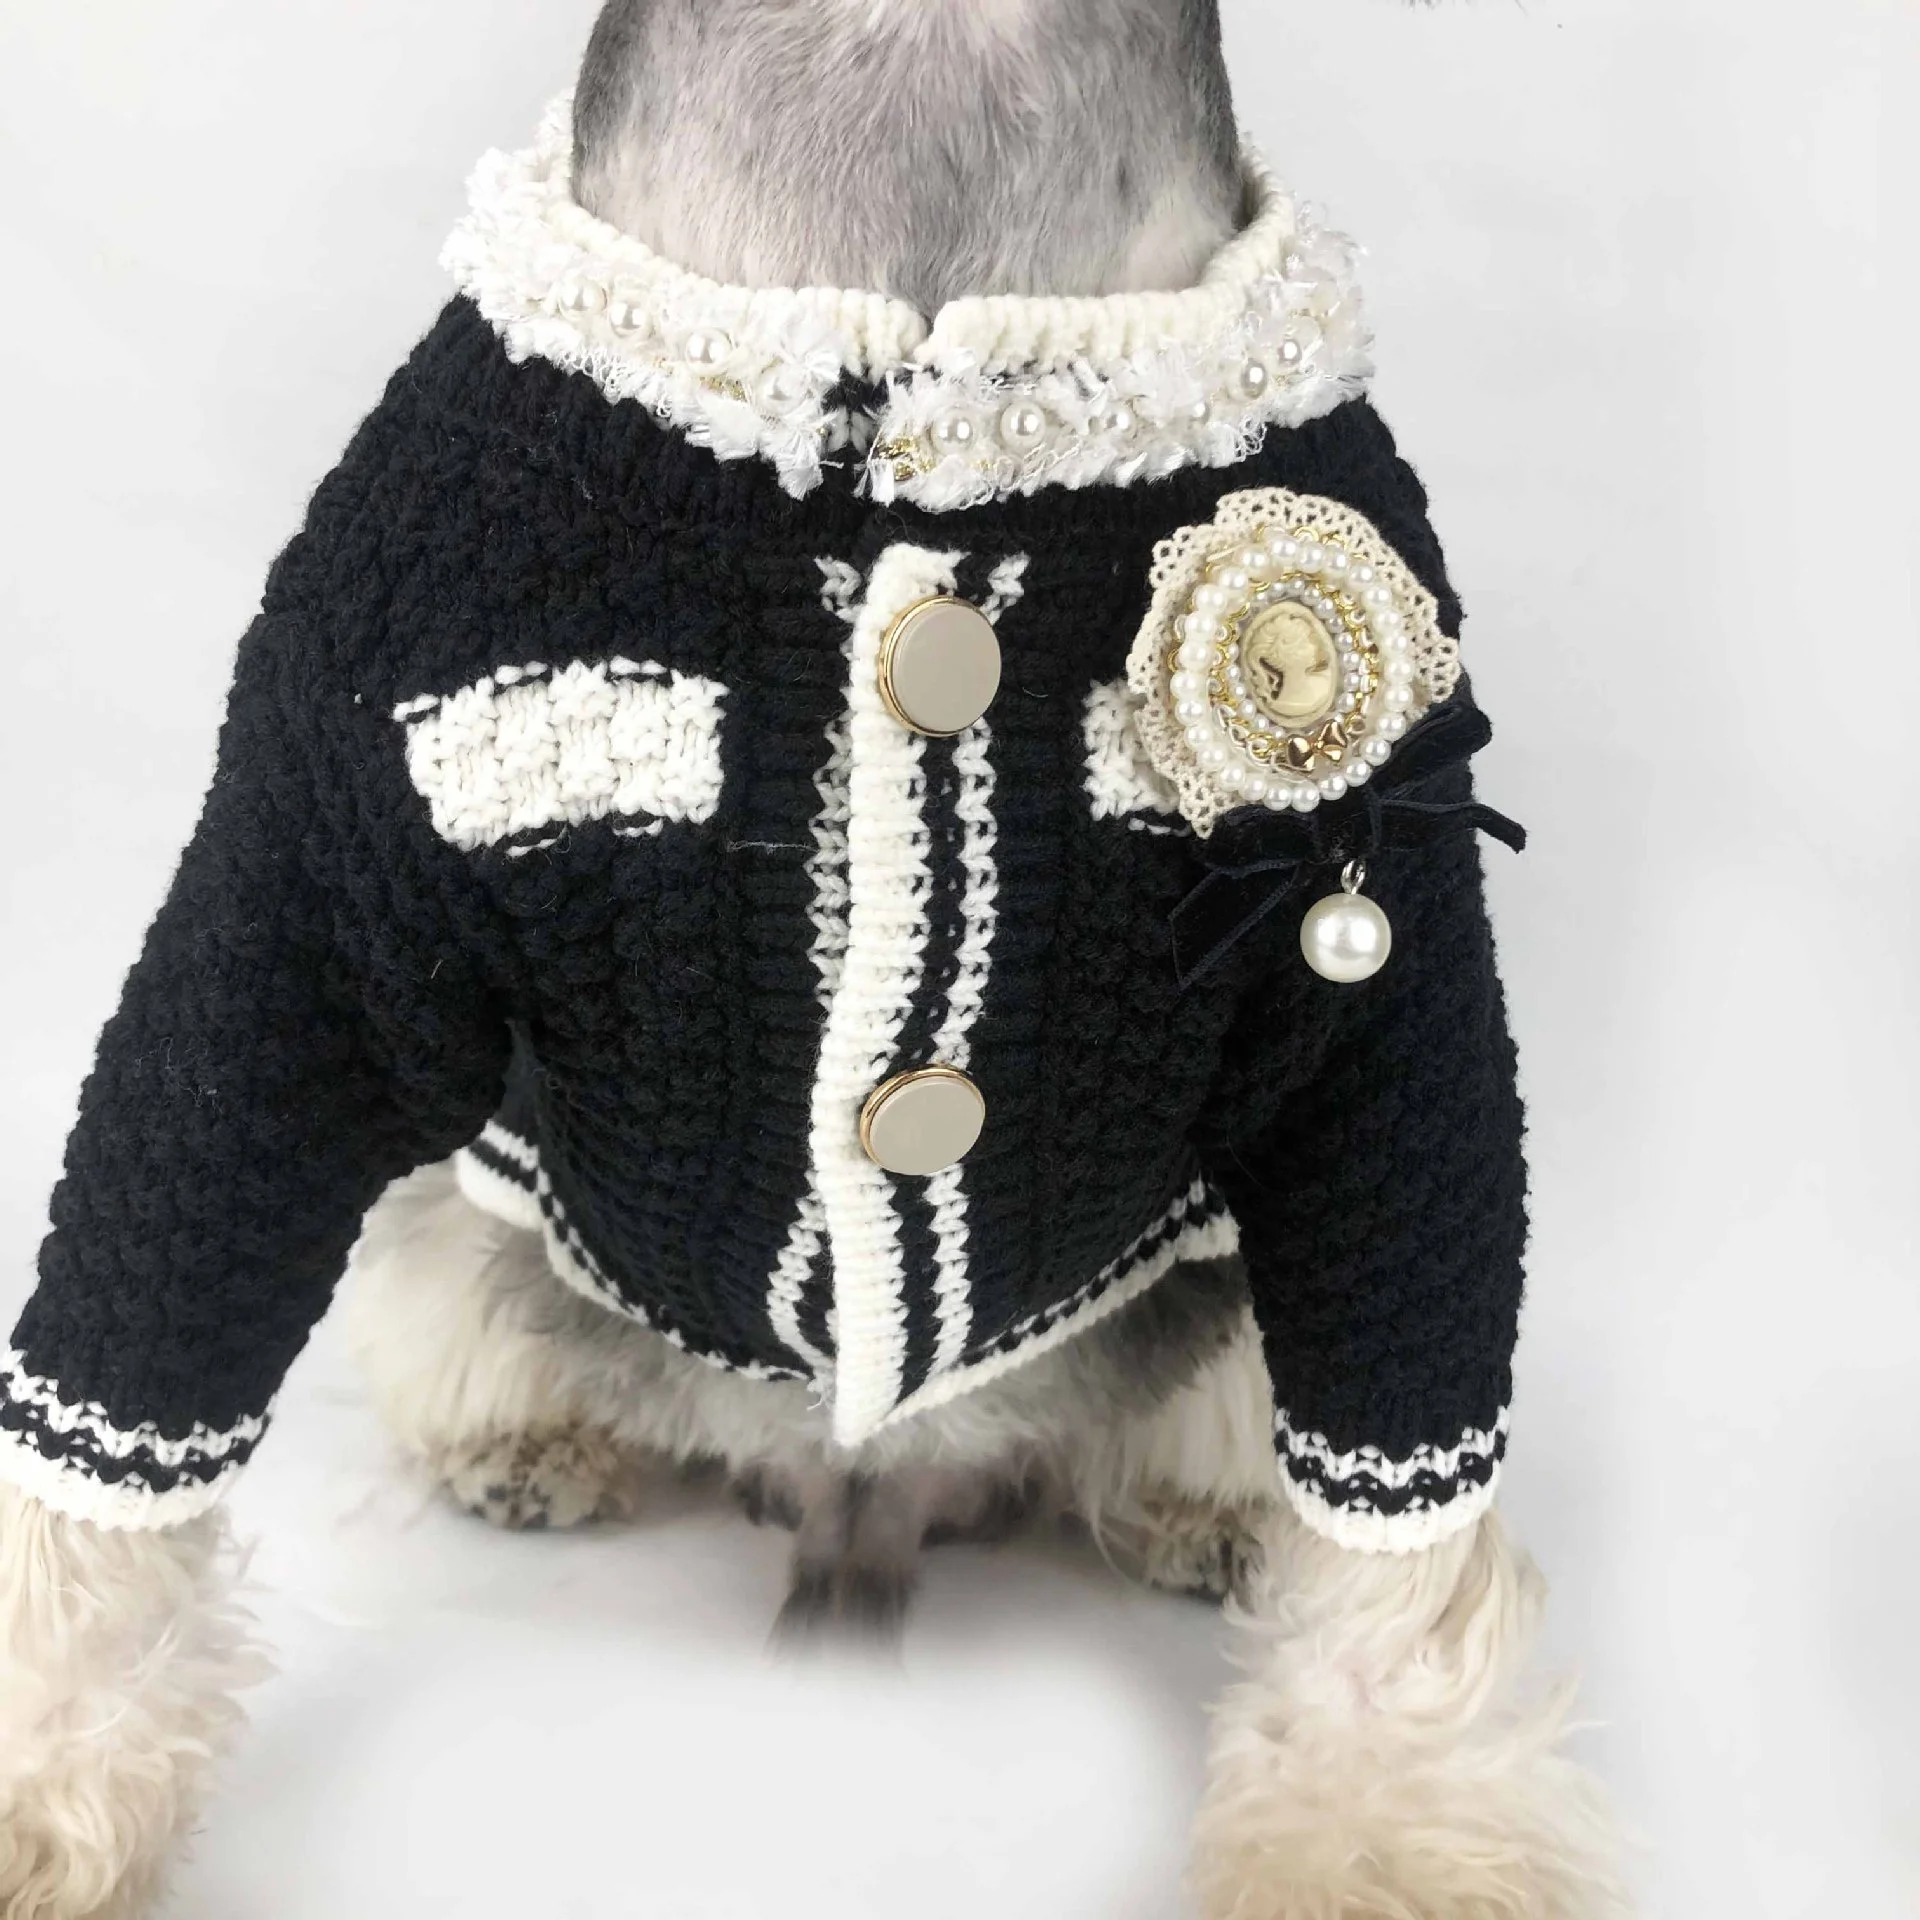 REDUCED: Chanel Inspired Dog Harness for Sale in Bellmore, NY